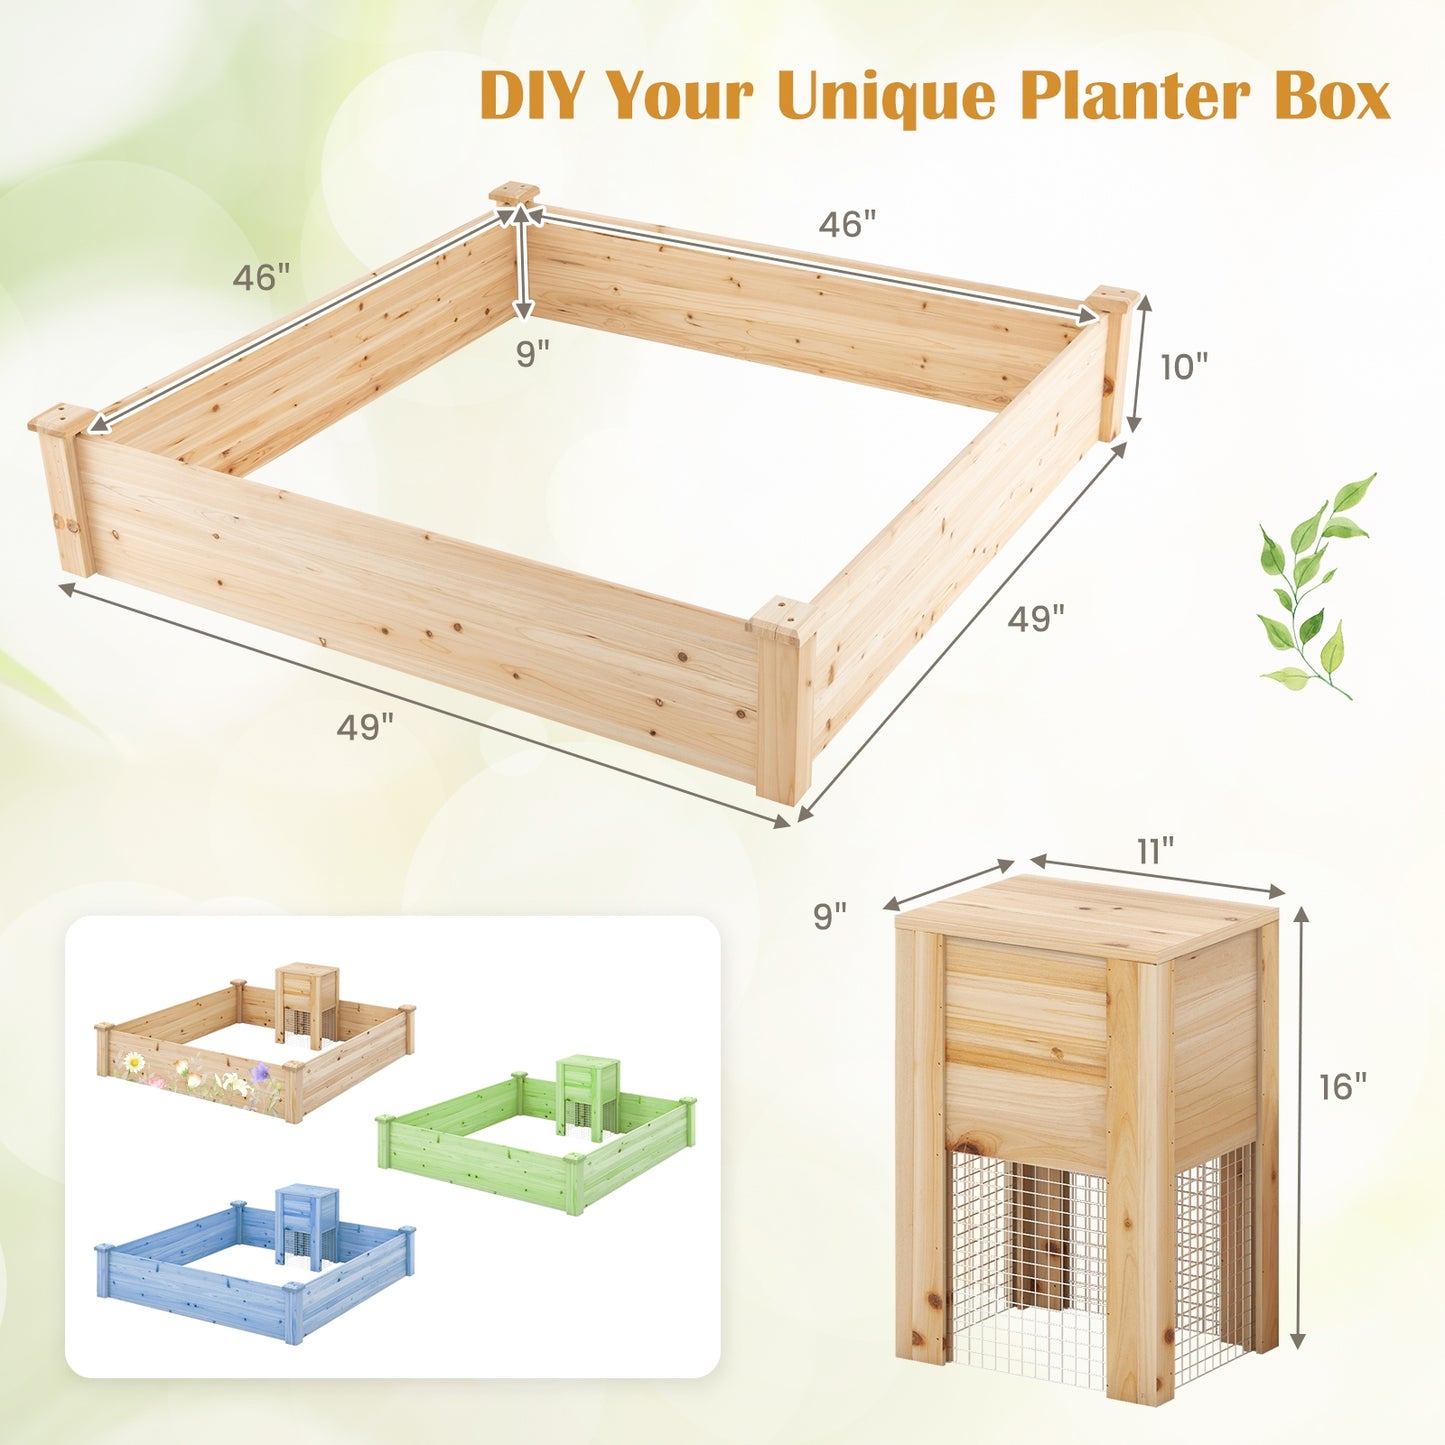 49" x 49" x 10" Raised Garden Bed with Compost Bin and Open-ended Bottom - Gallery Canada